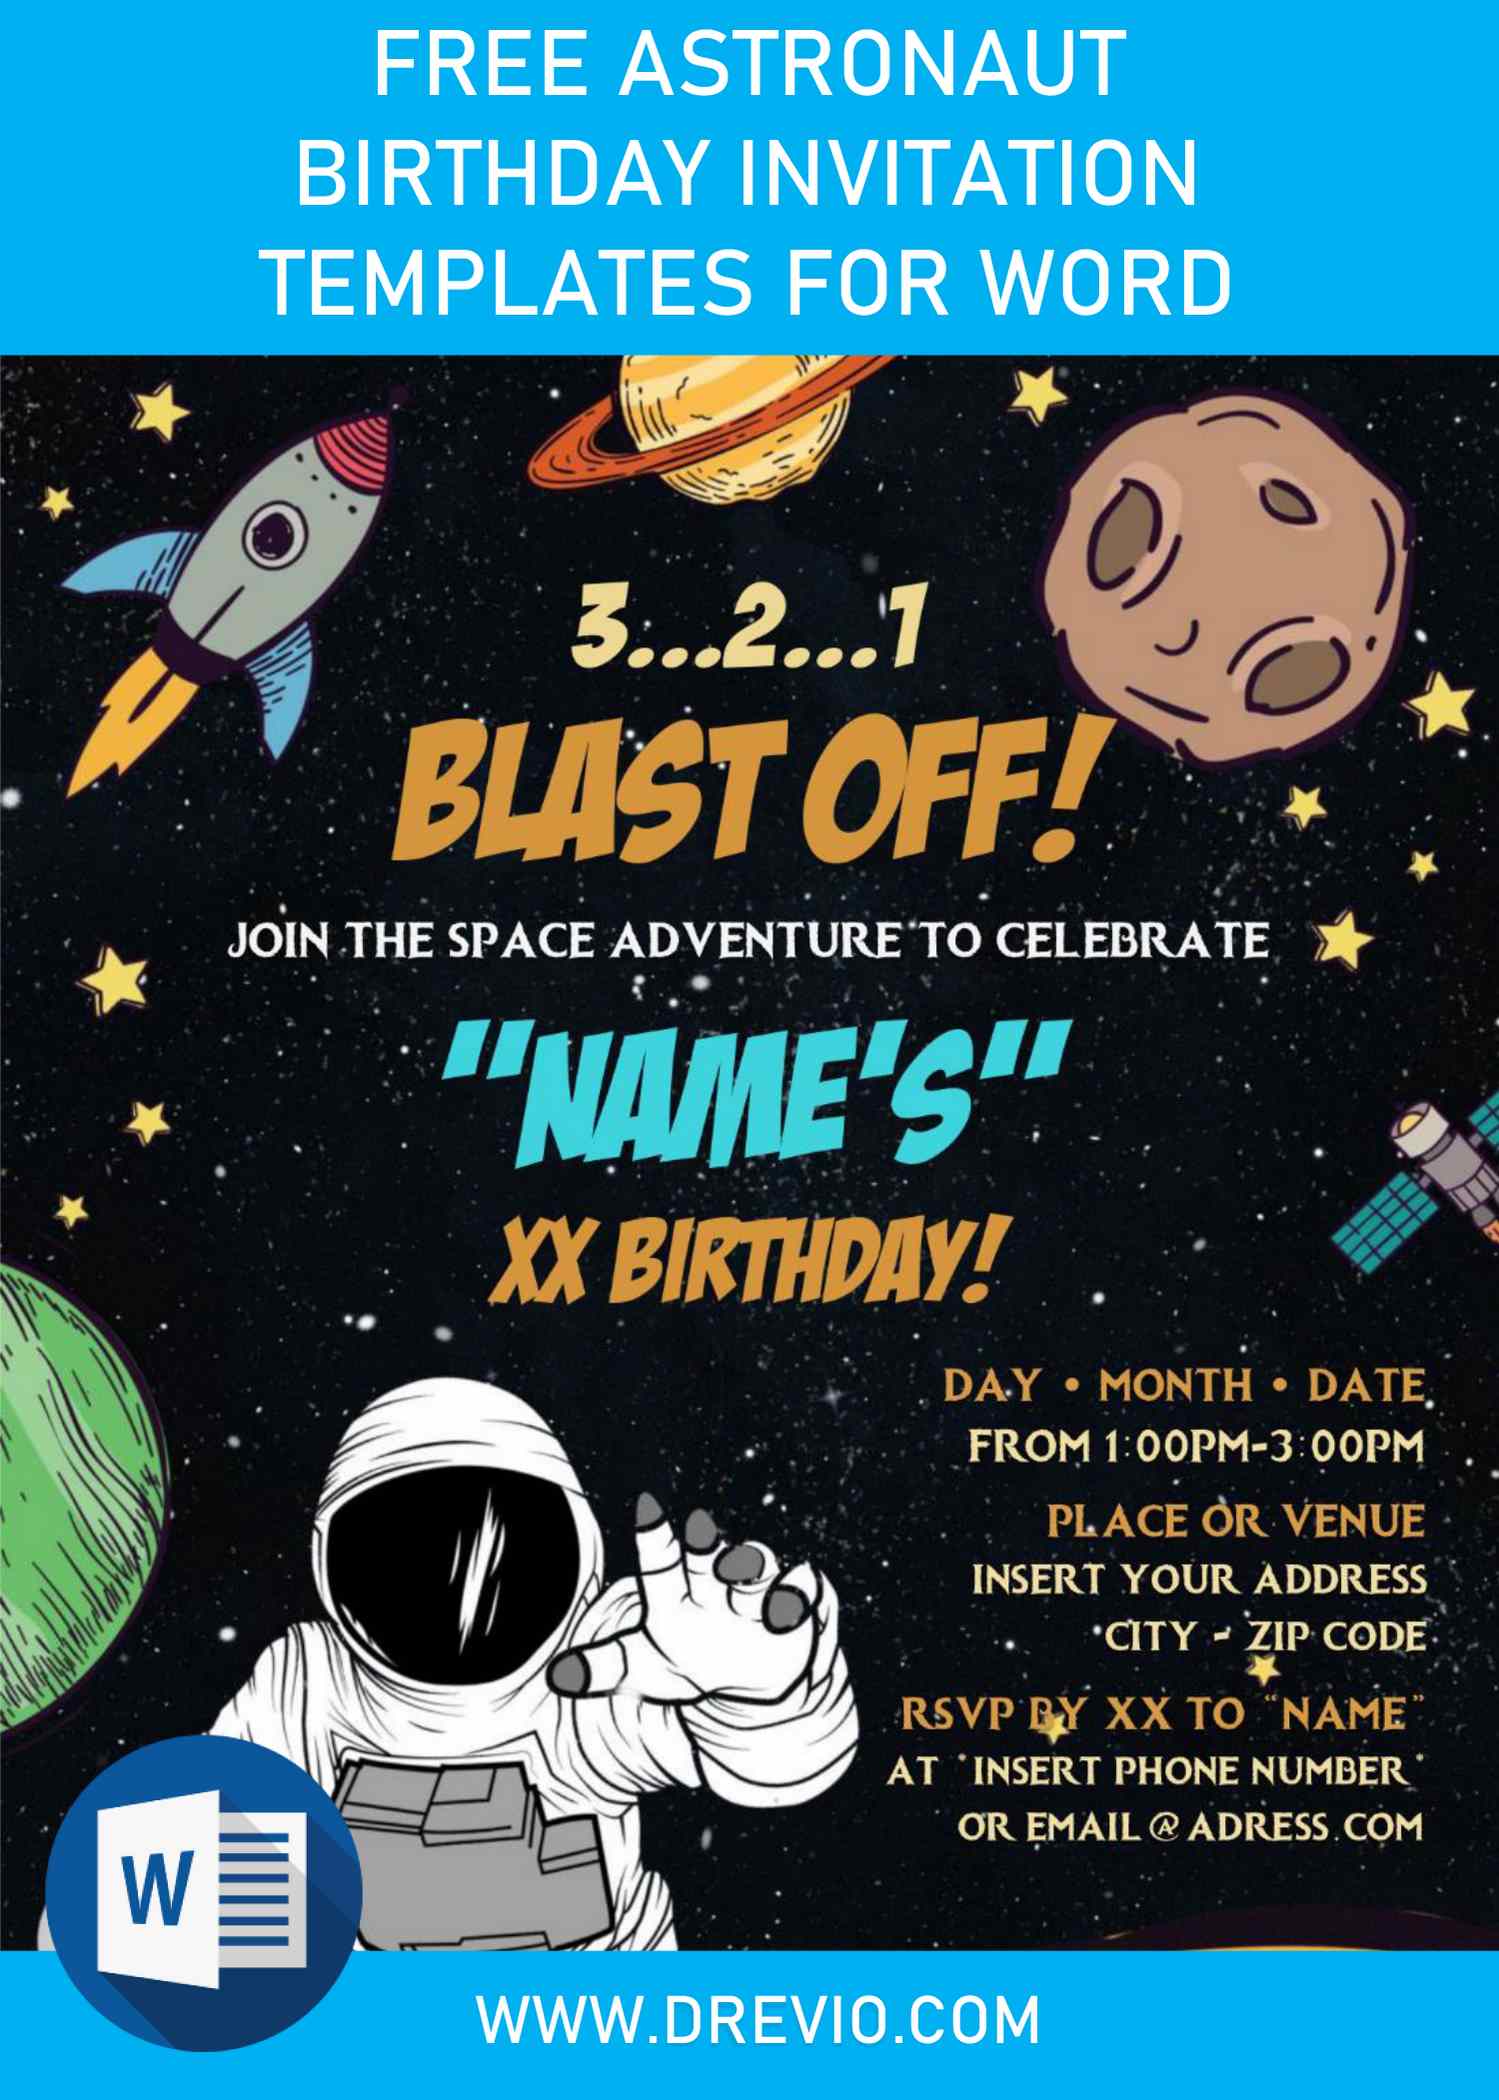 Free Astronaut Birthday Invitation Templates For Word and has